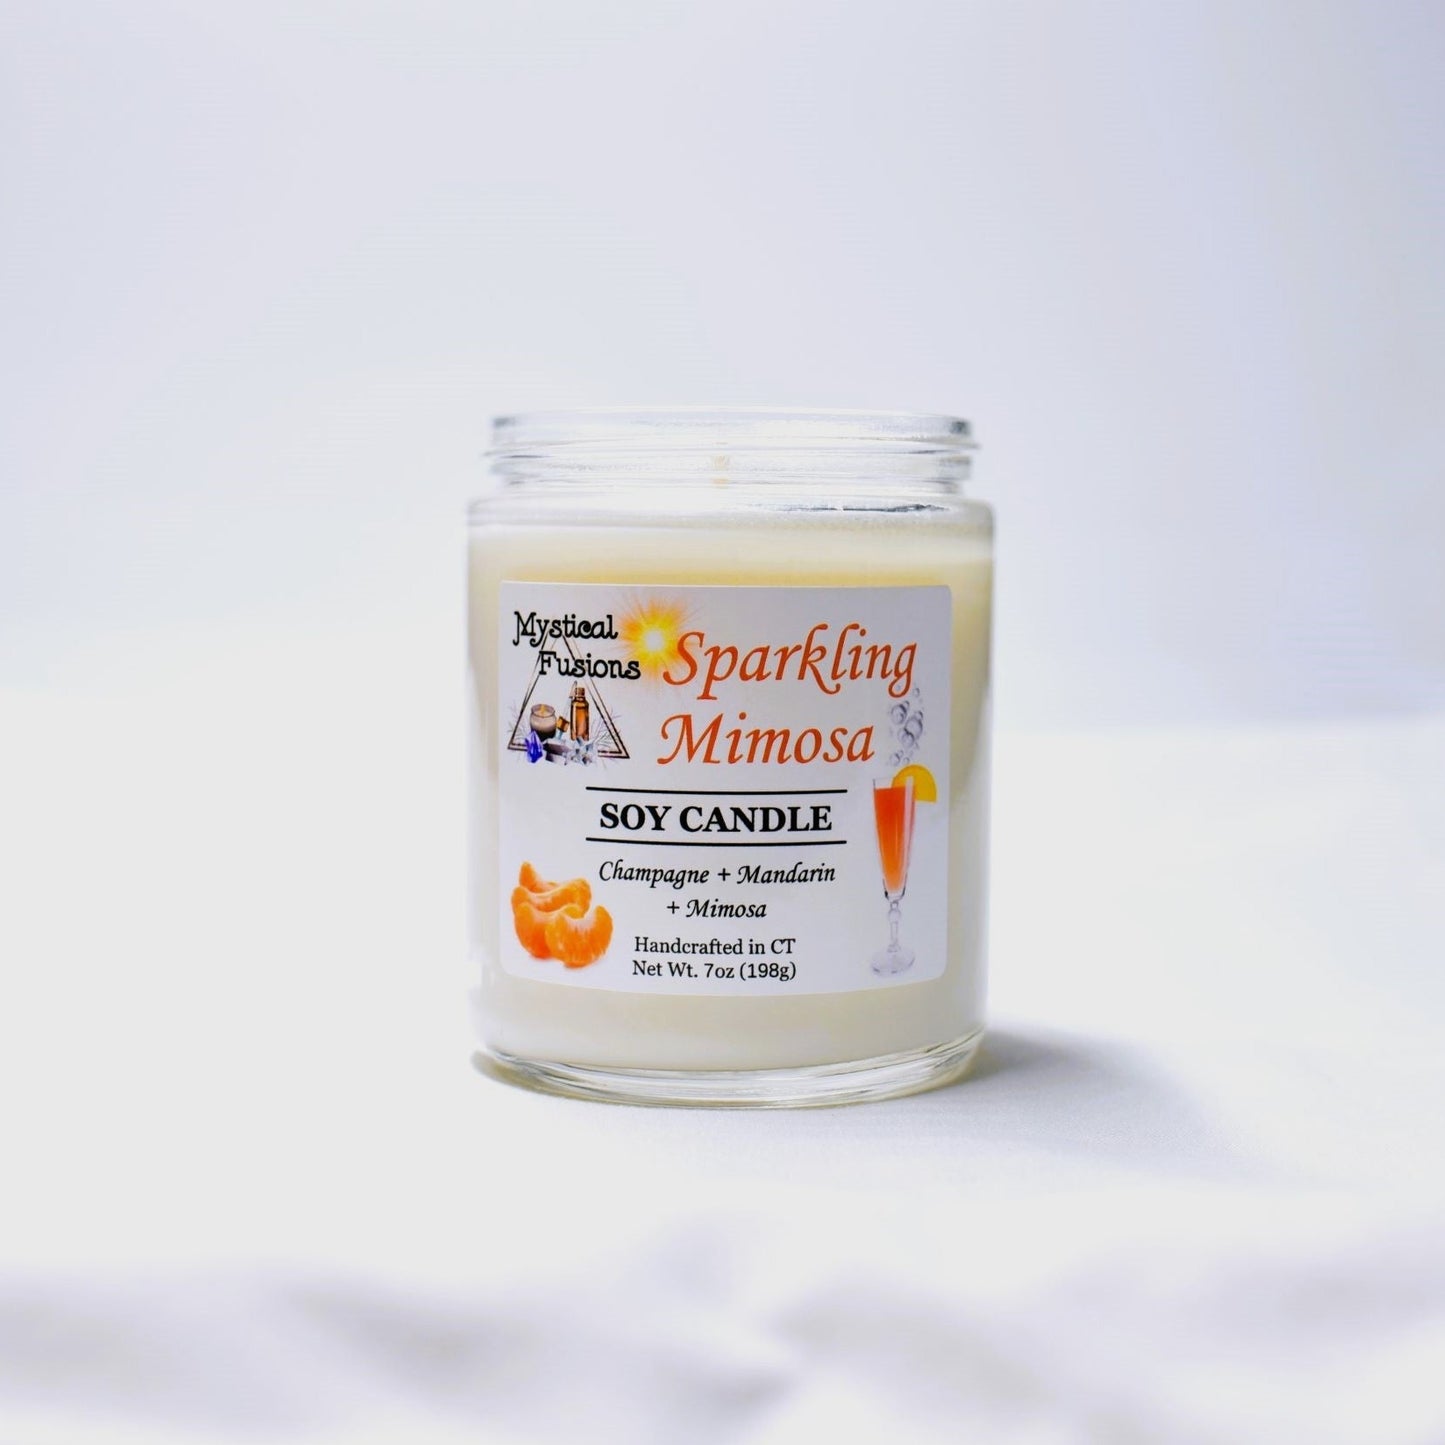 SALE - All 7oz Candles $8.00